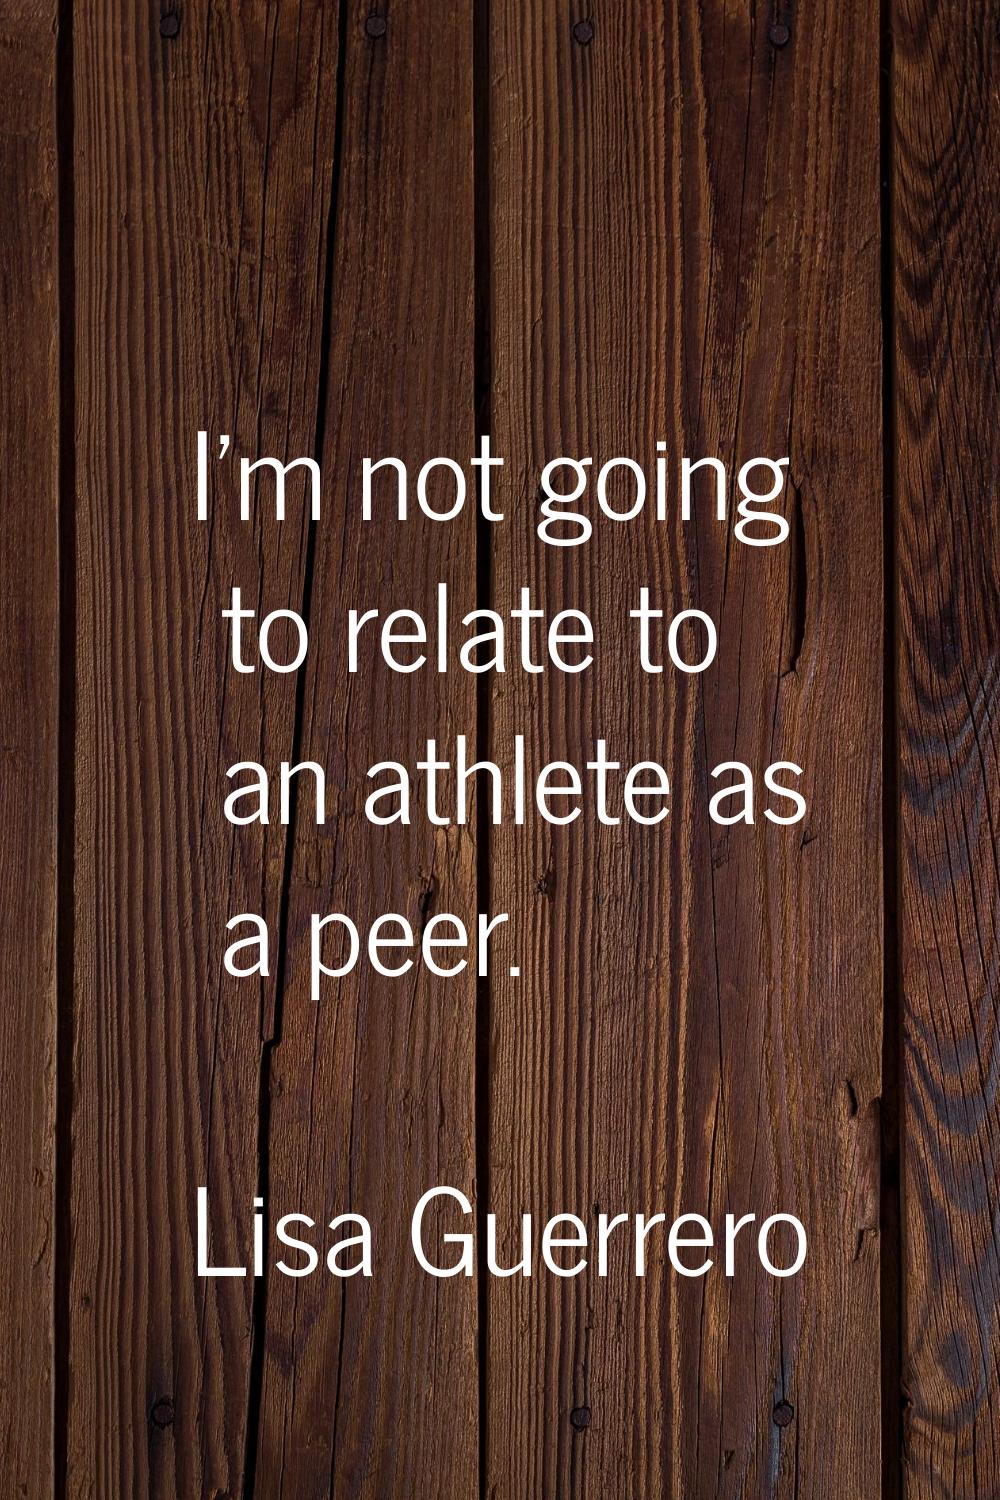 I'm not going to relate to an athlete as a peer.